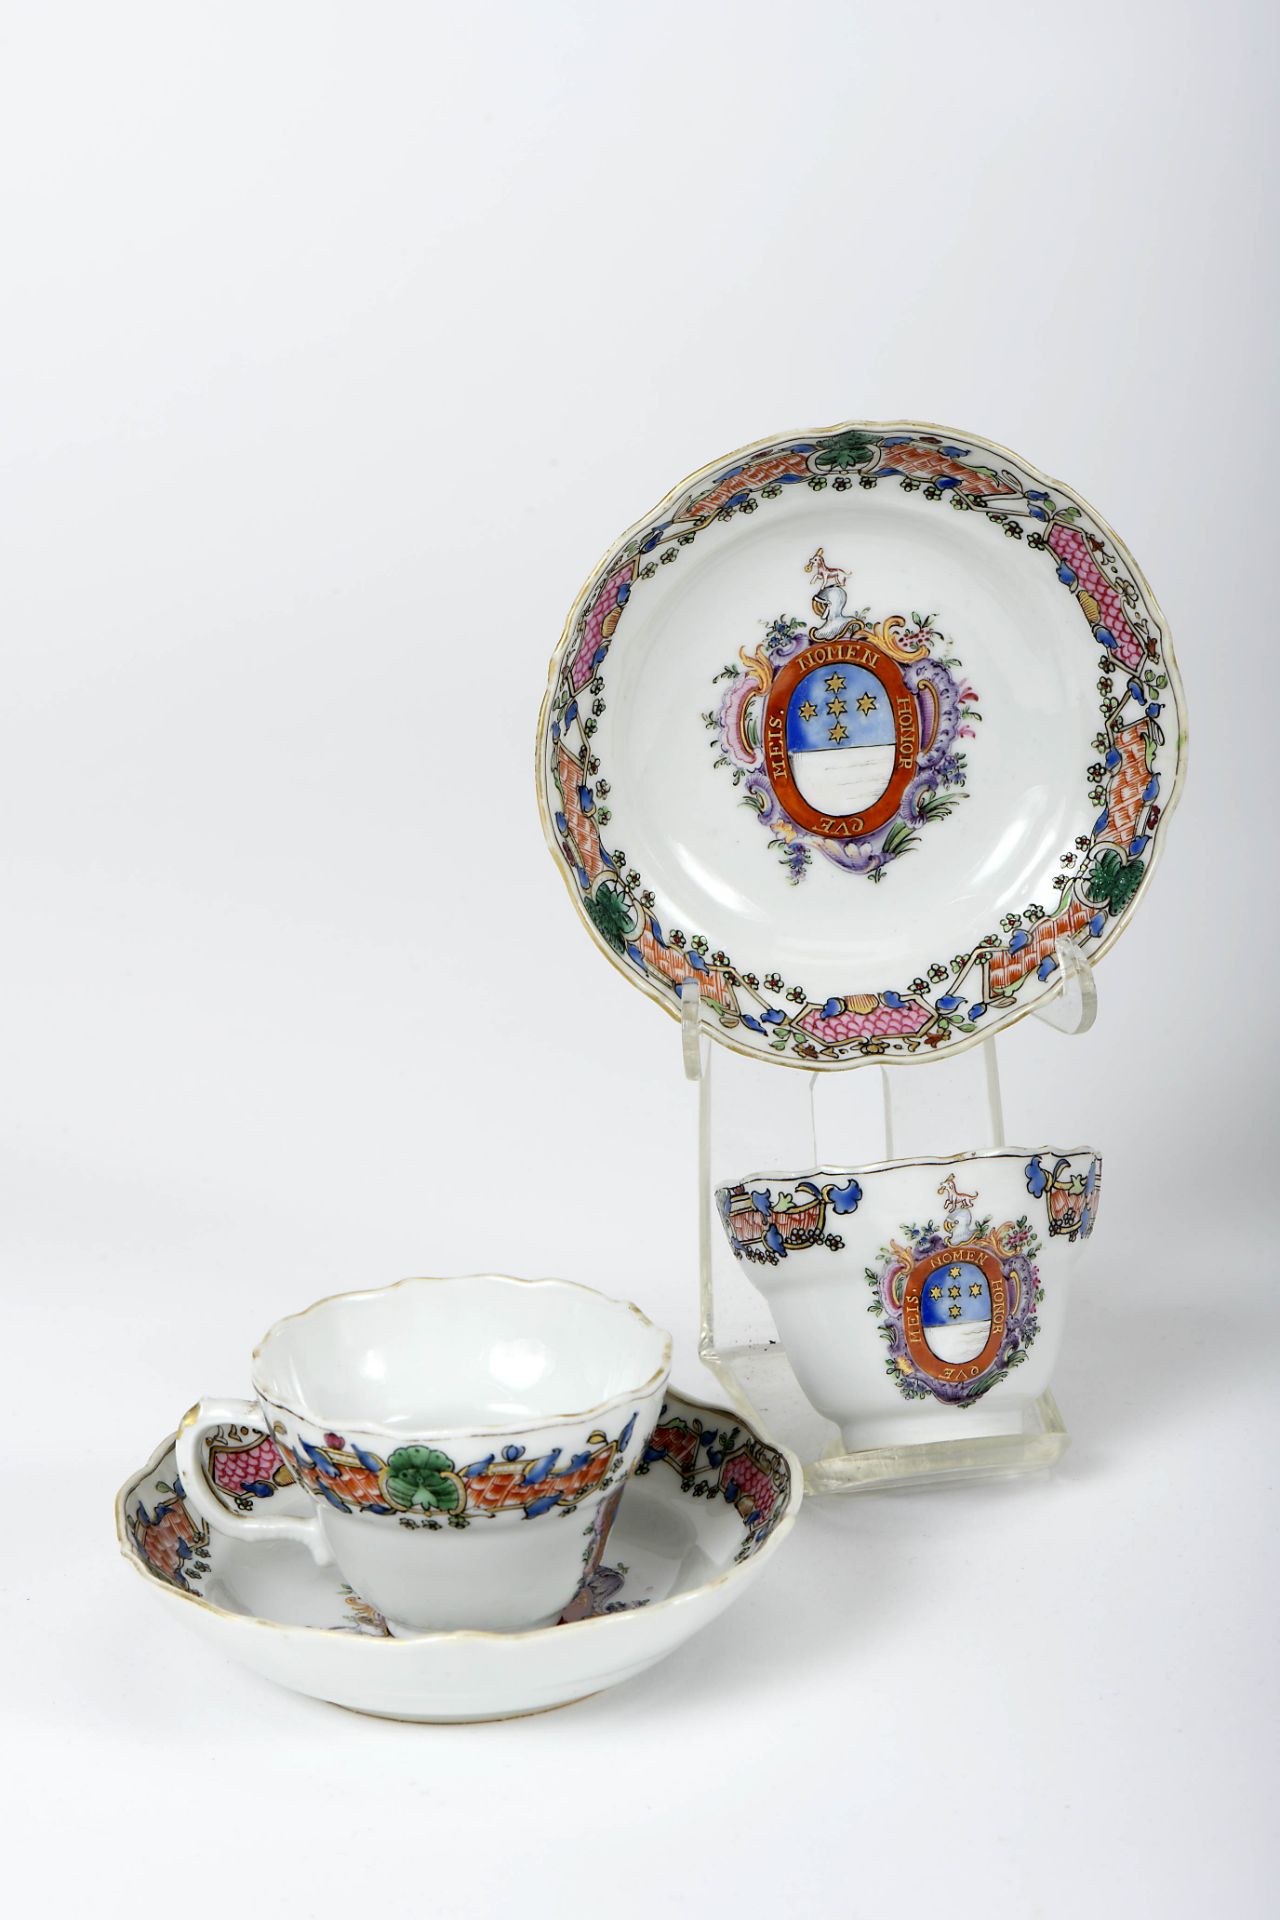 A pair of cups and saucers with wavy edges - Image 2 of 2